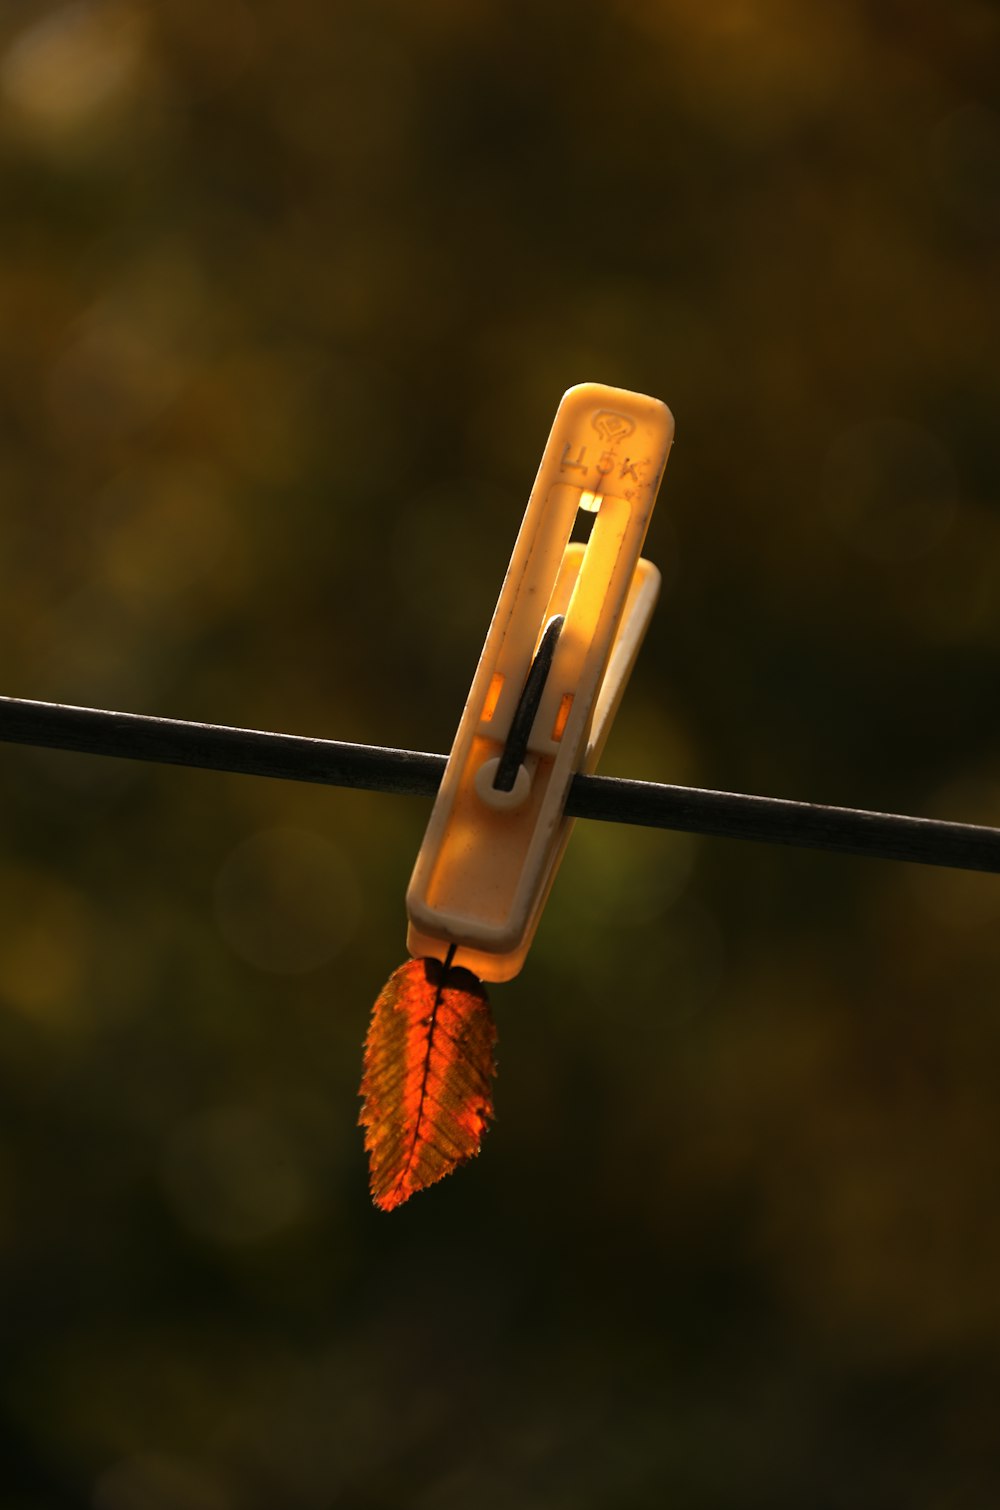 a close up of an orange object on a wire